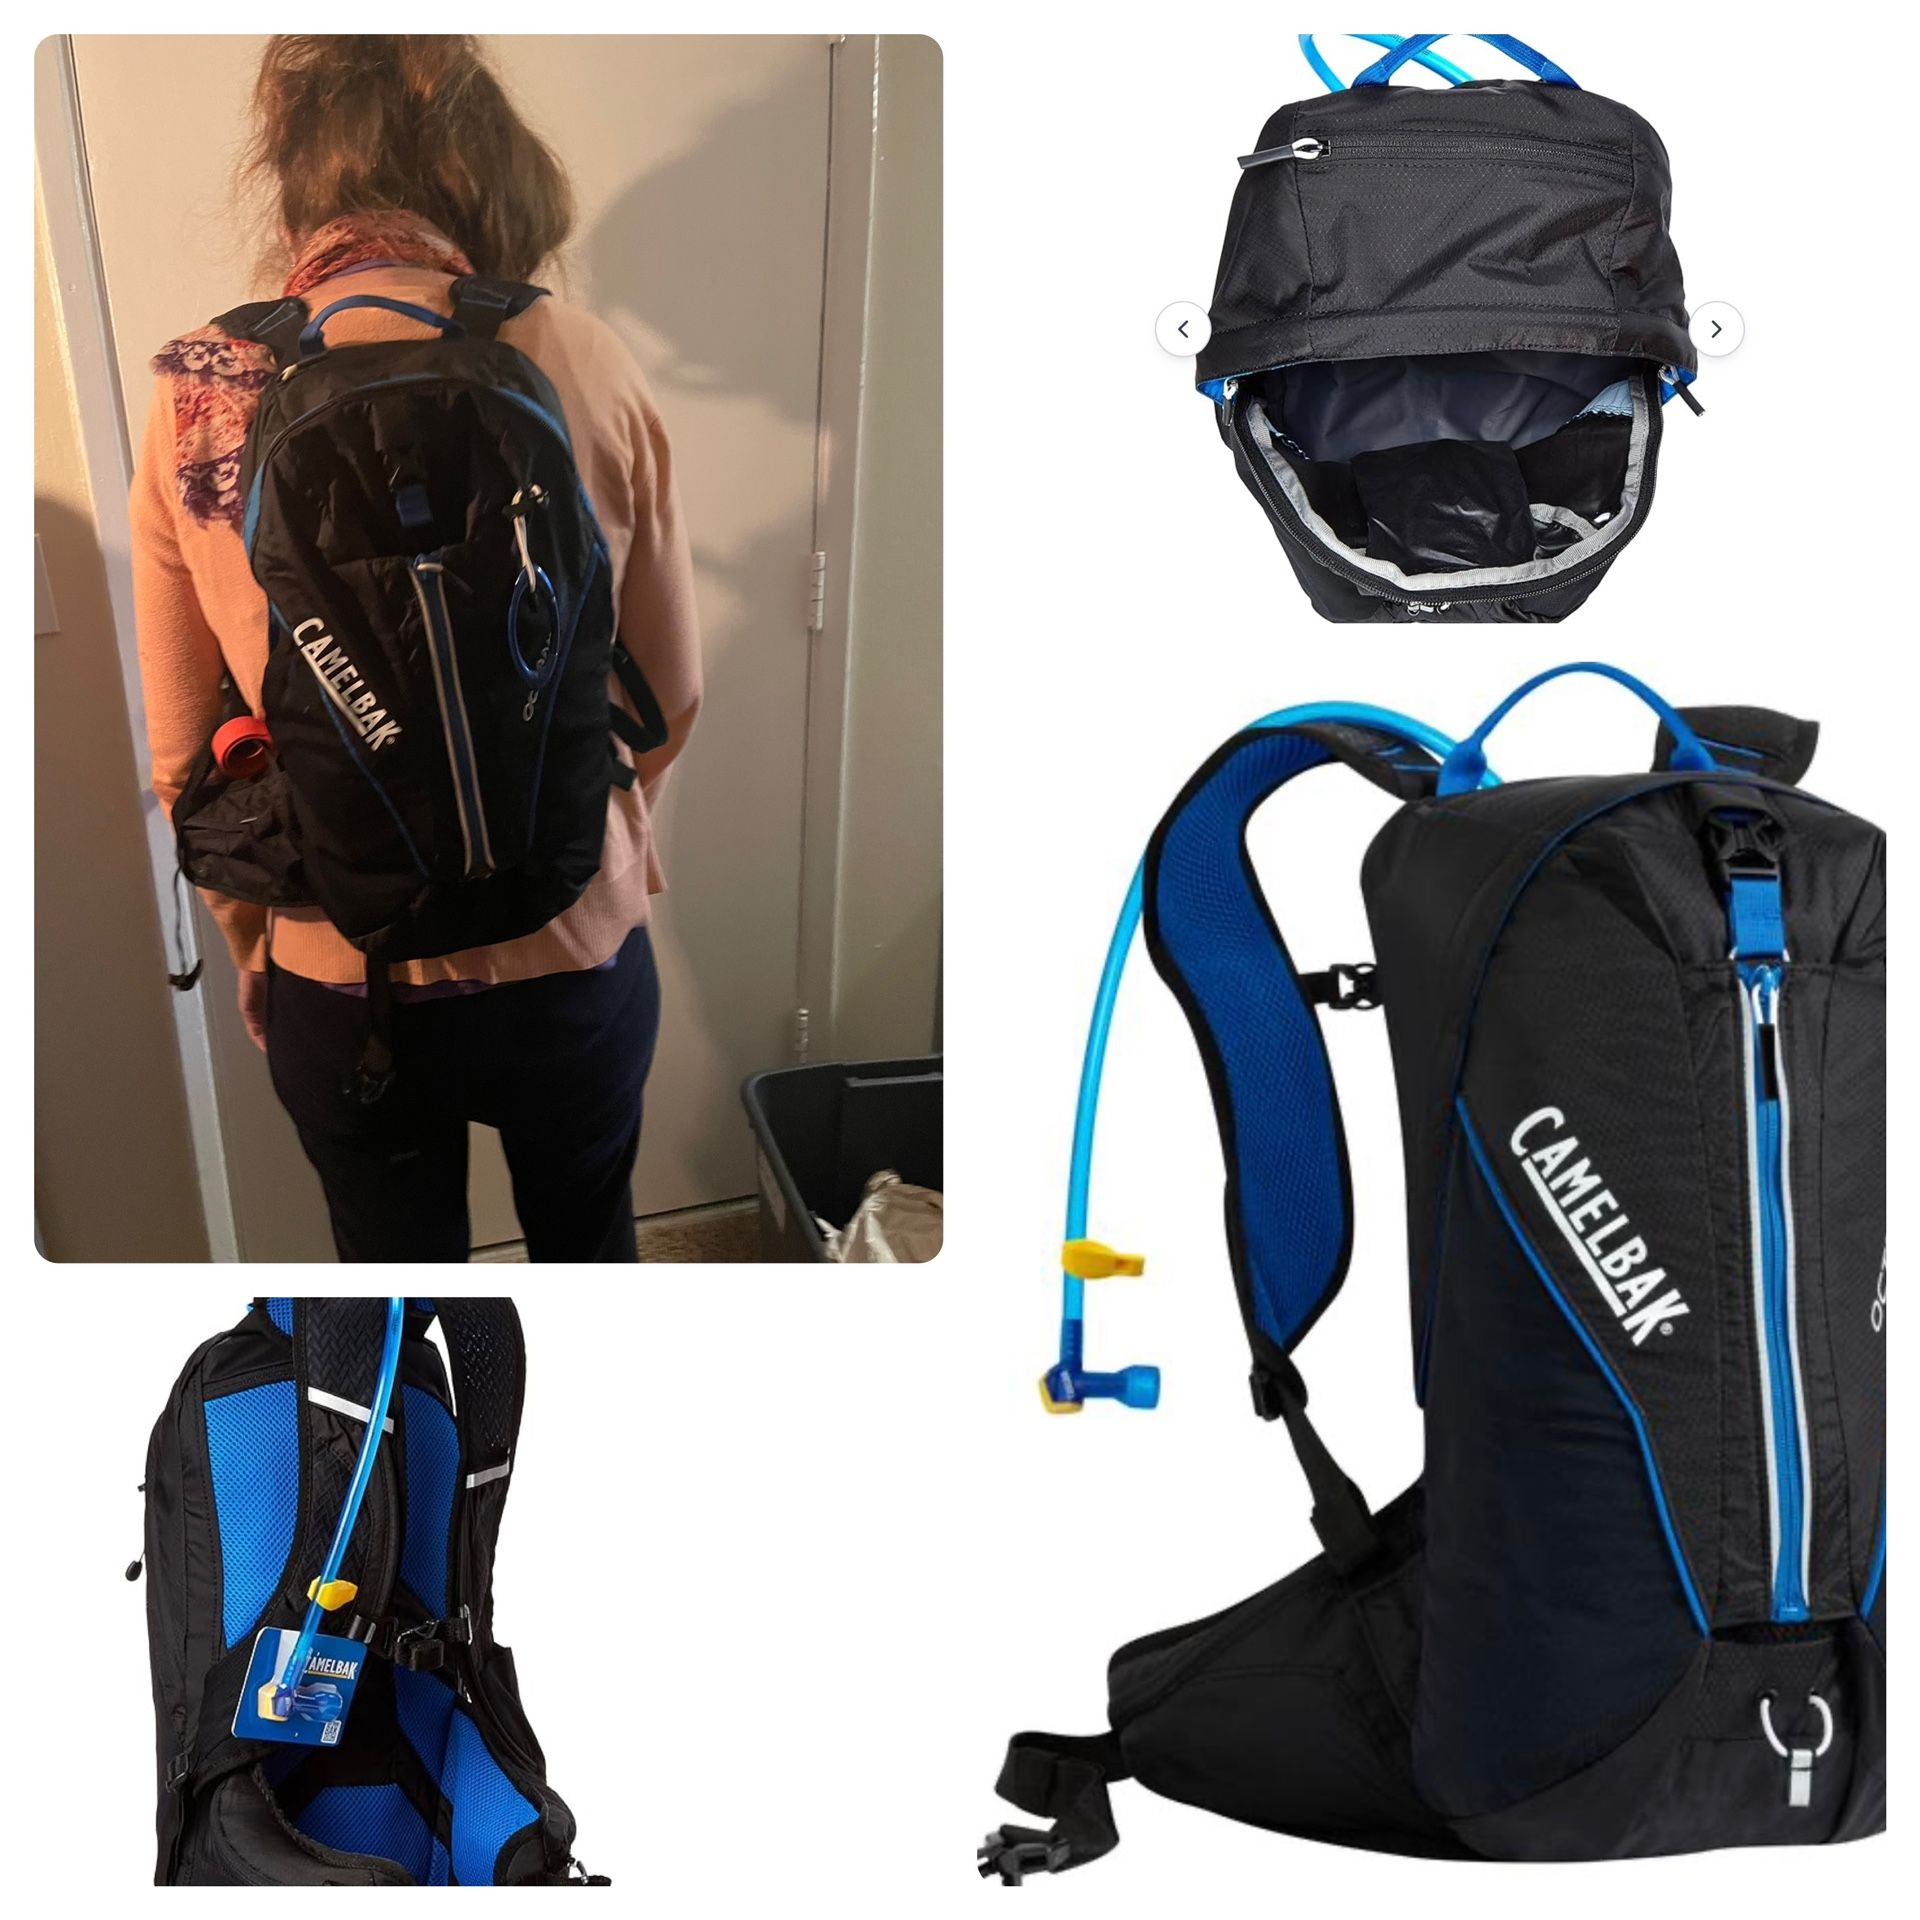 CamelBak Octane 18X hydration hiking backpack cycling blue and back